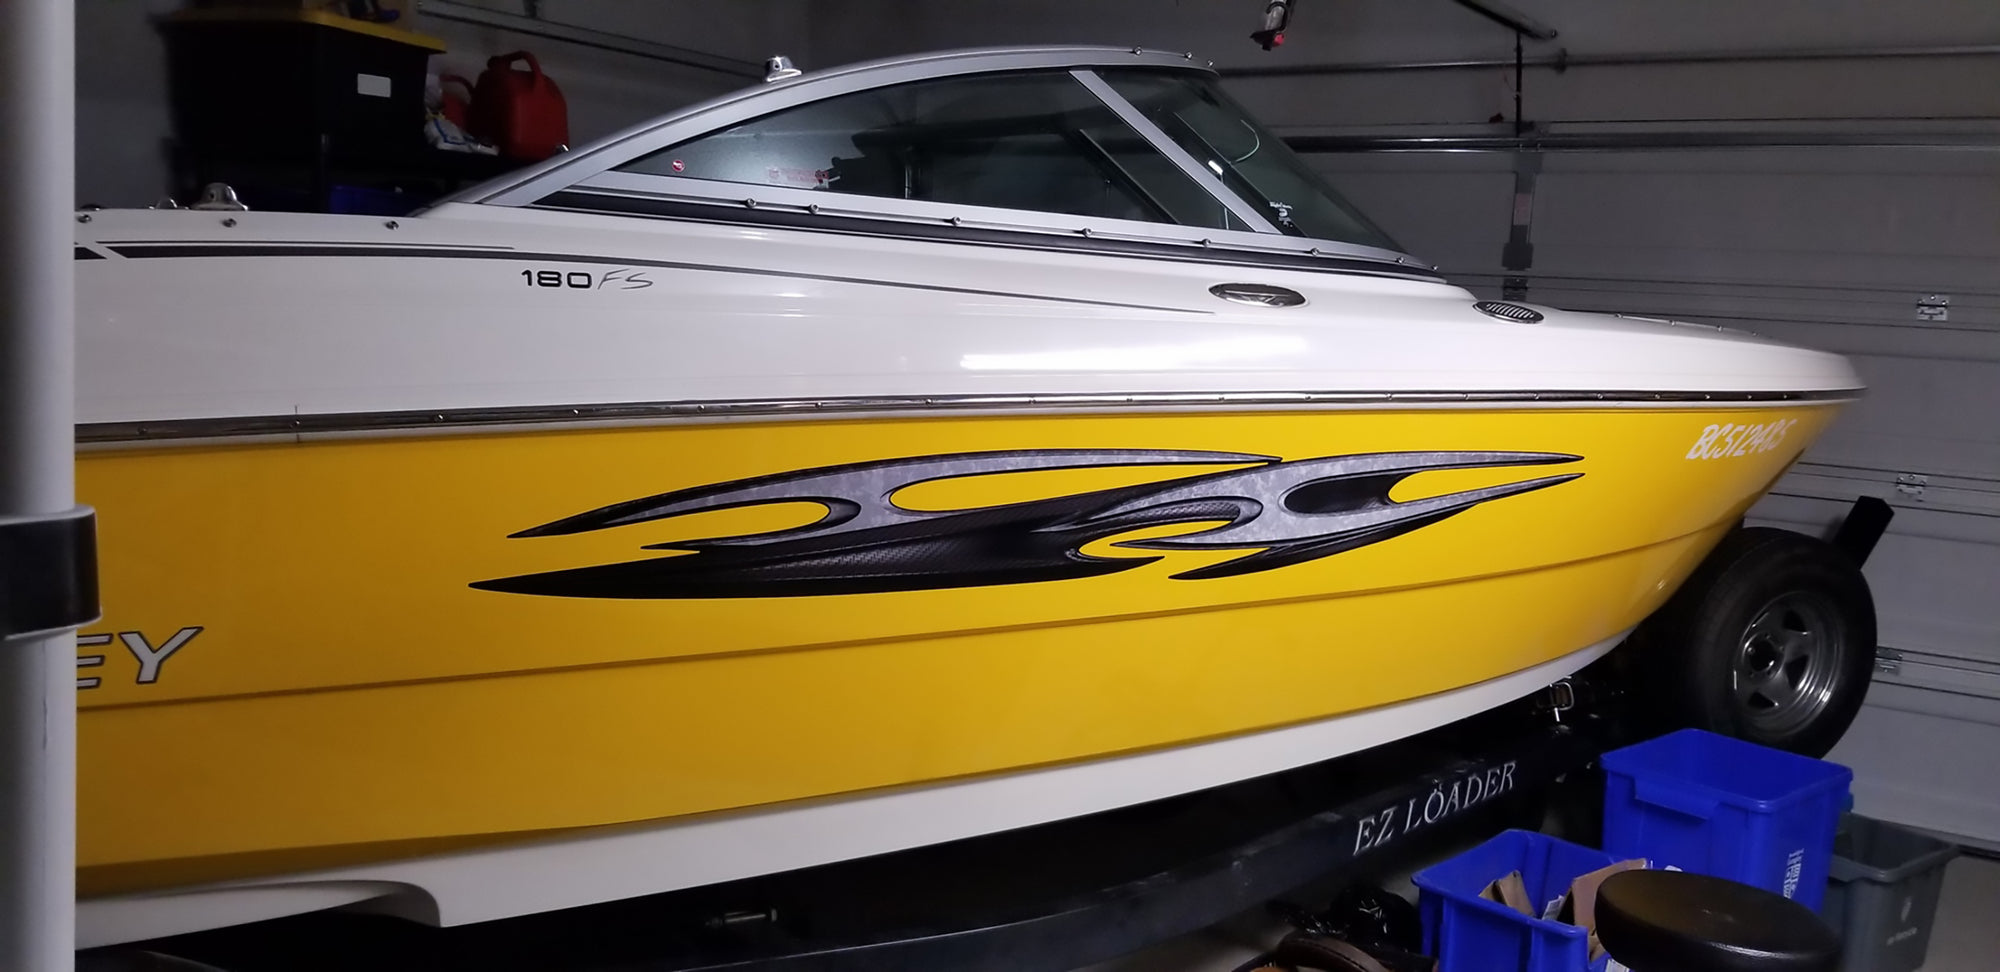 Tribal carbon fiber decal on side of yellow boat